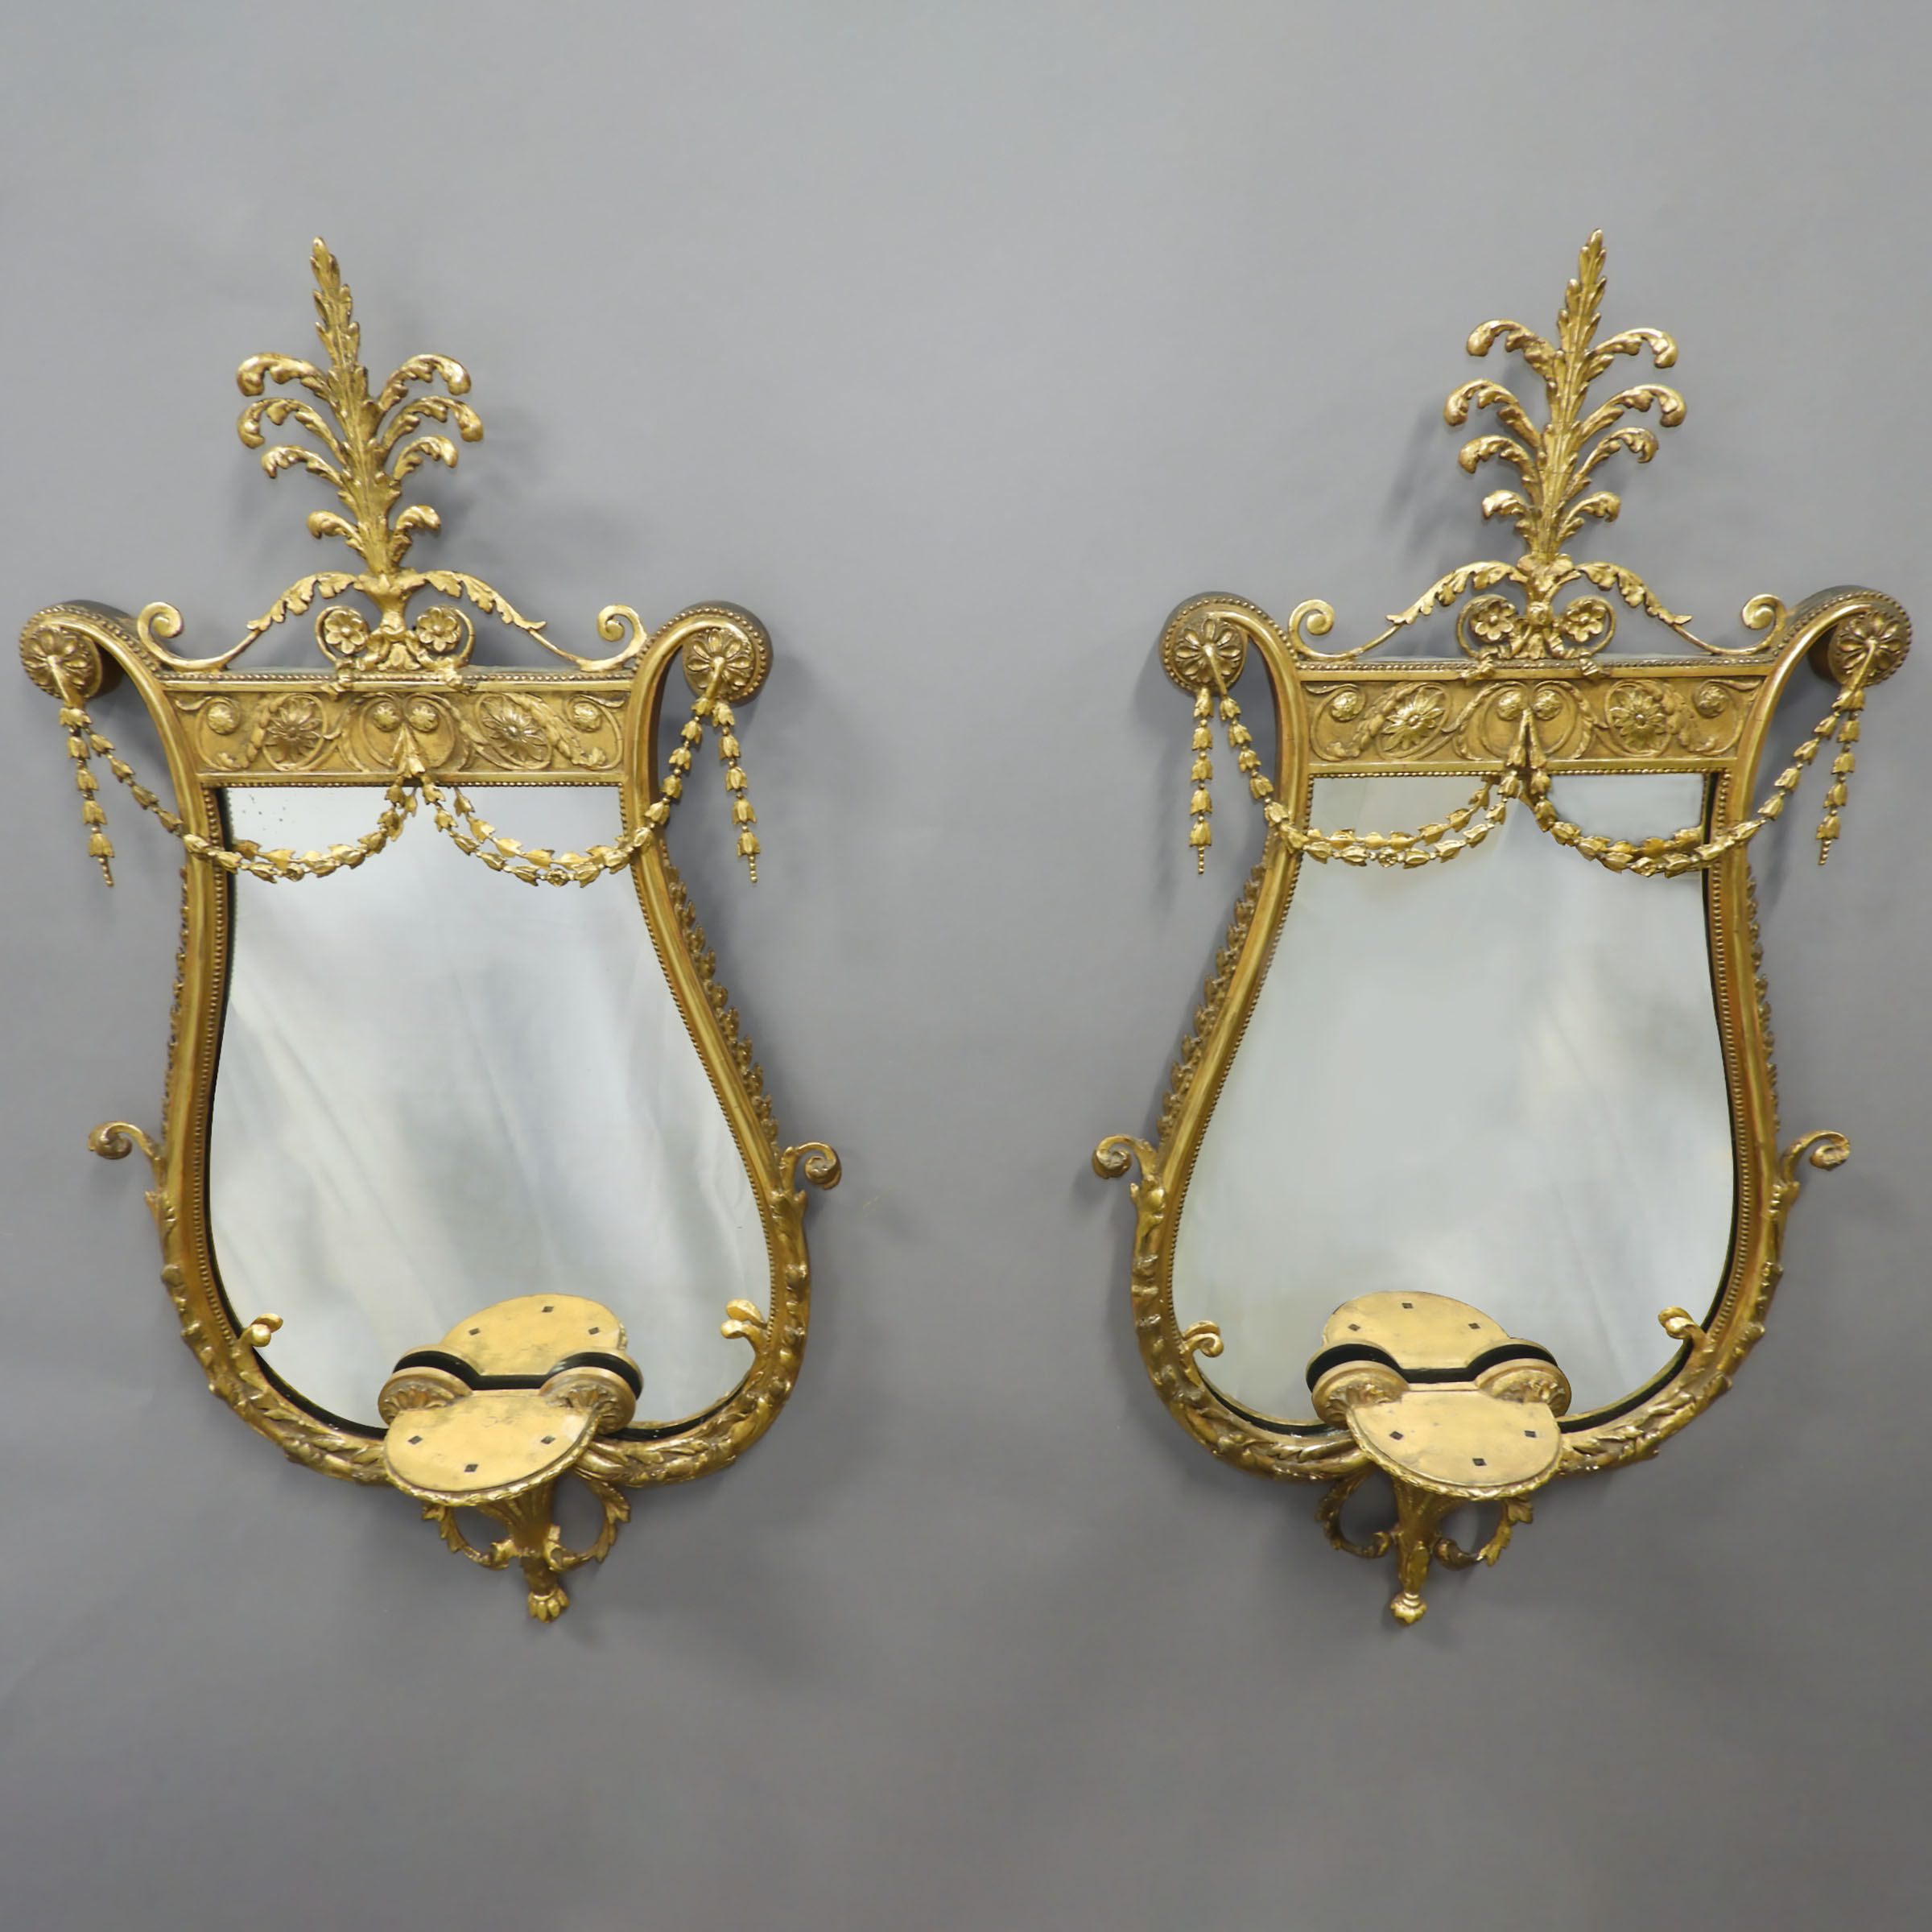 Pair of Empire Style Giltwood Mirror Sconces, 19th century